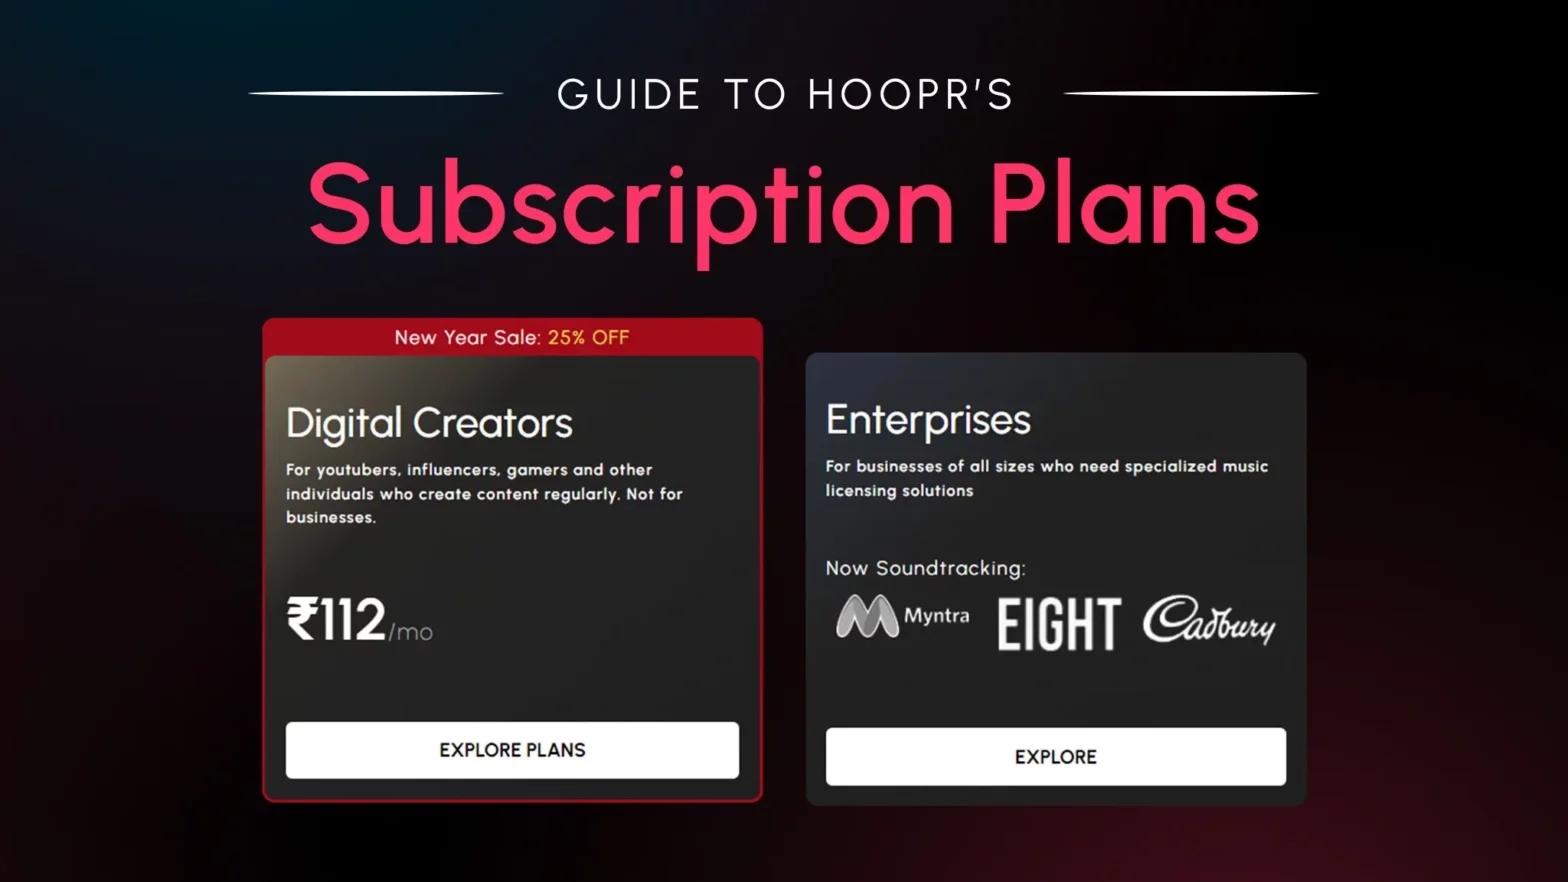 Guide to Hoopr's Subscription Plans